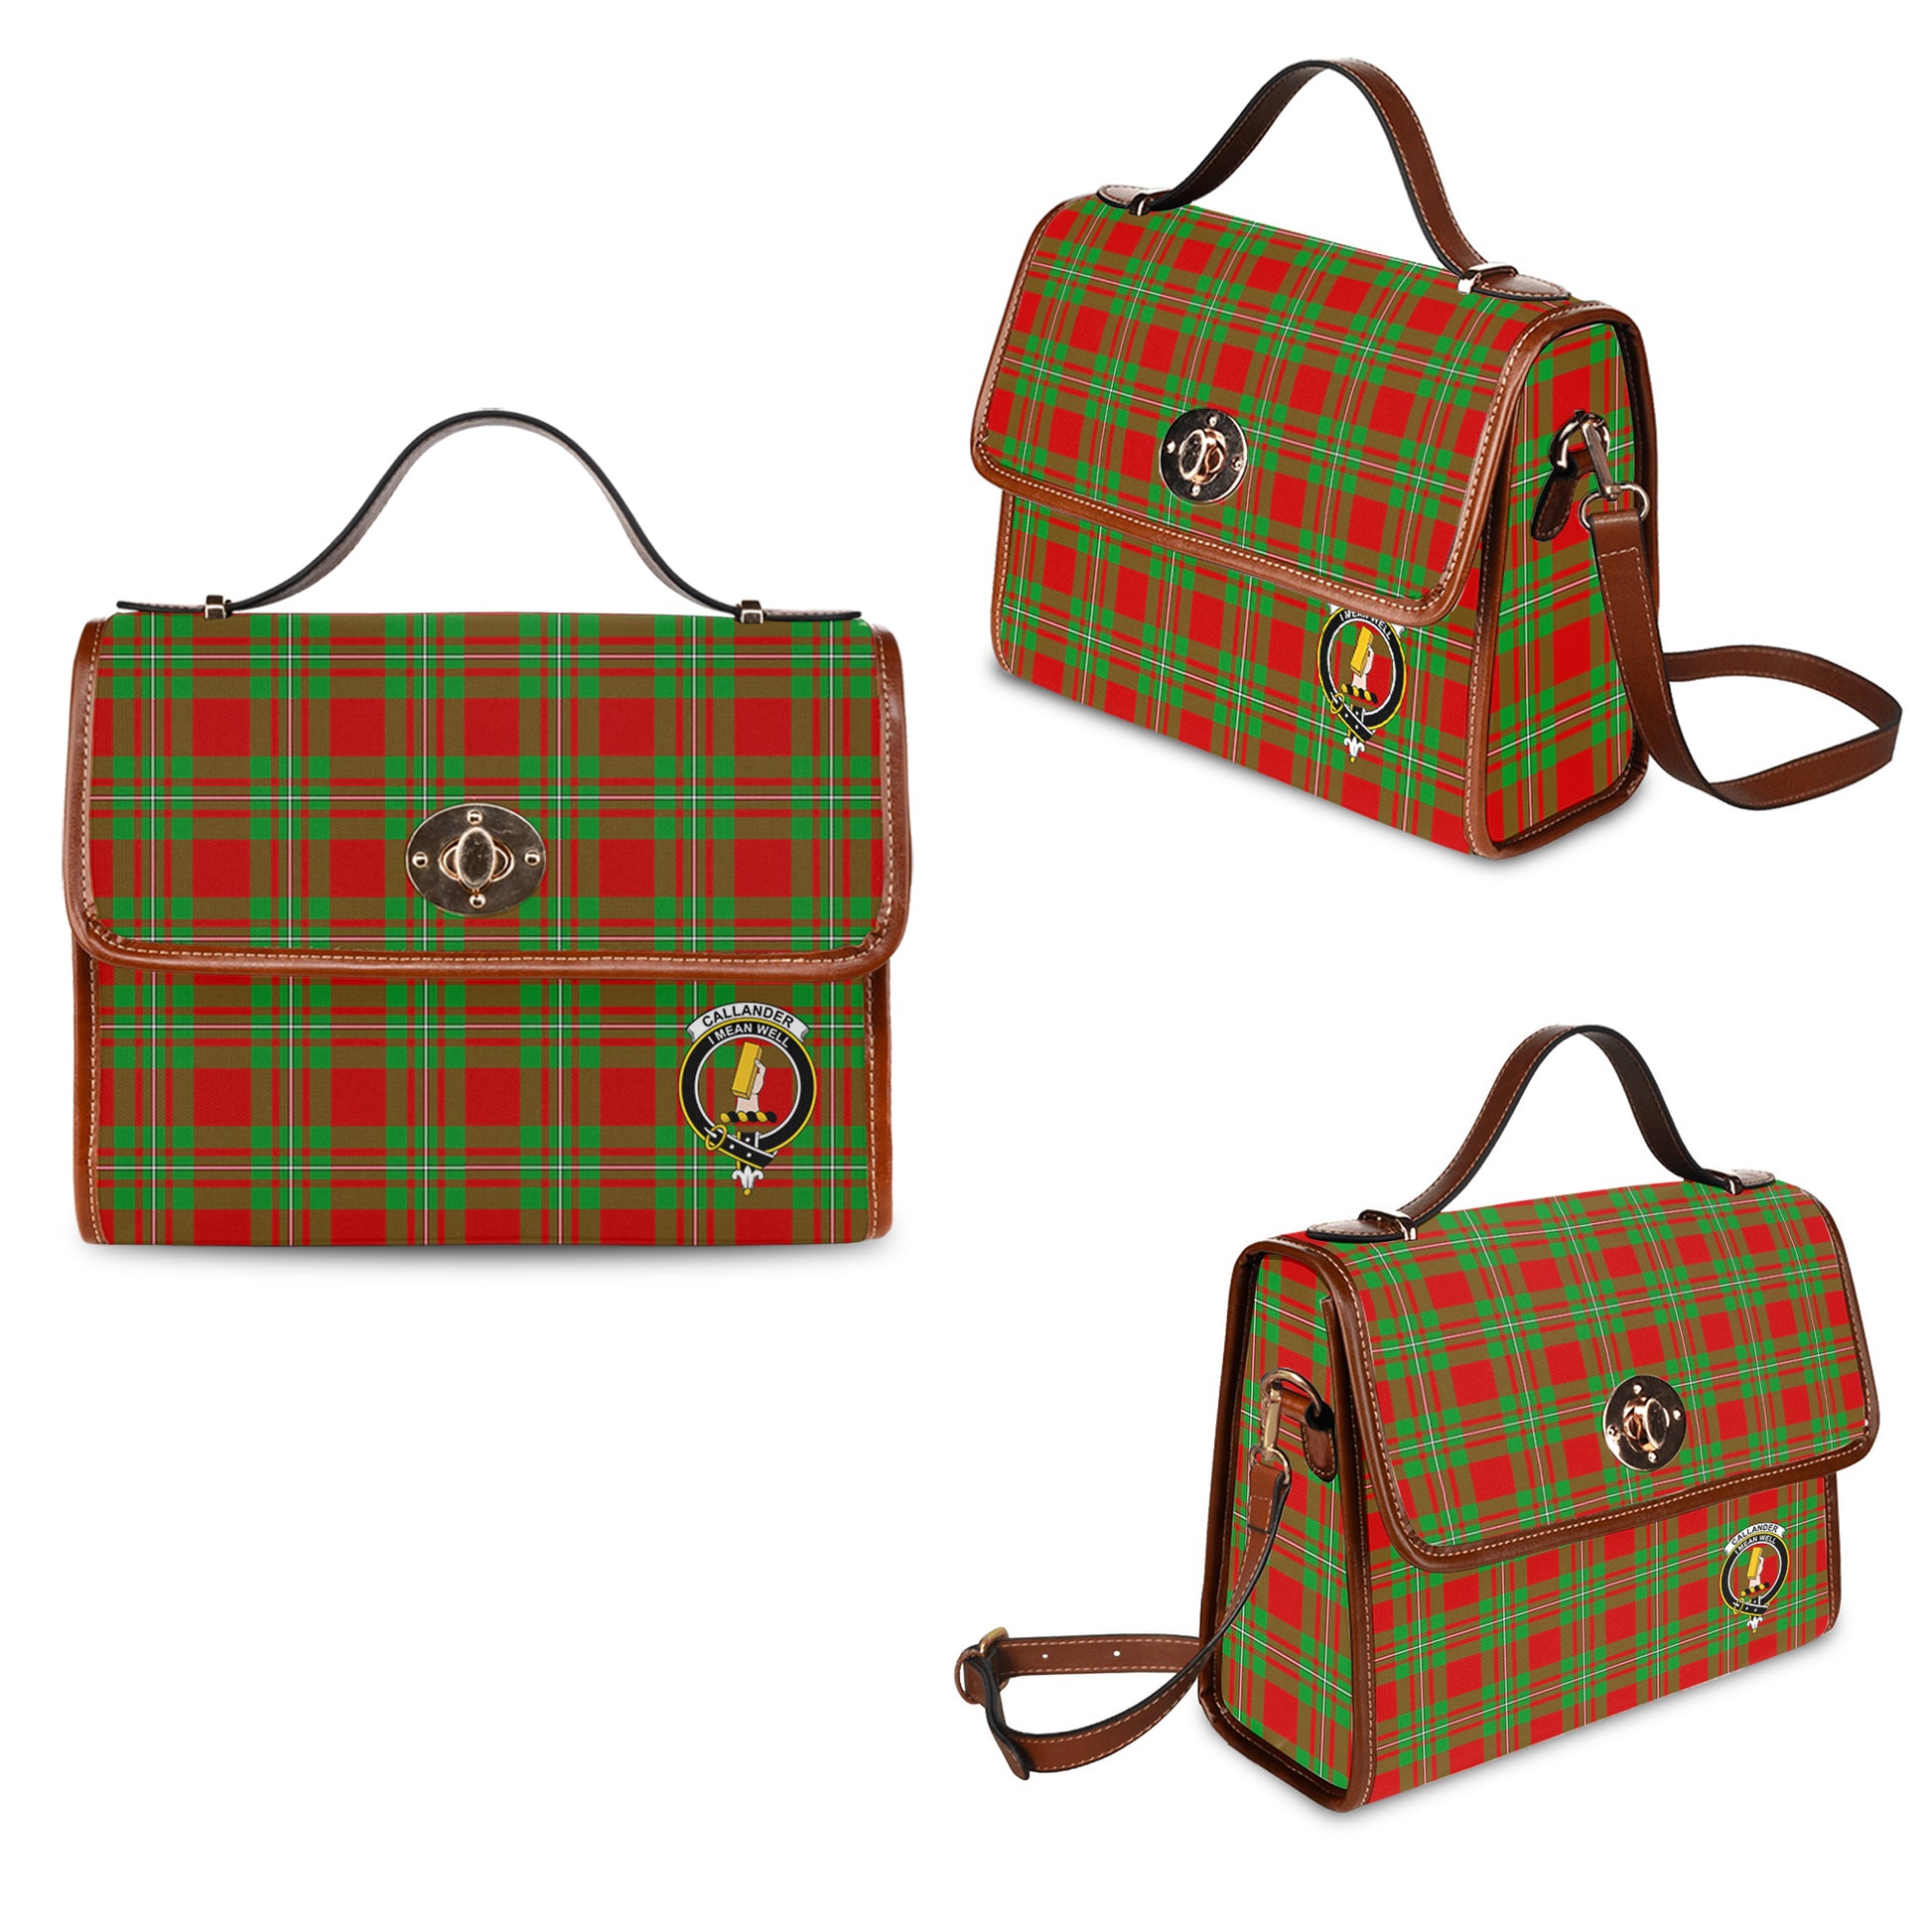 Callander Modern Tartan Leather Strap Waterproof Canvas Bag with Family Crest One Size 34cm * 42cm (13.4" x 16.5")